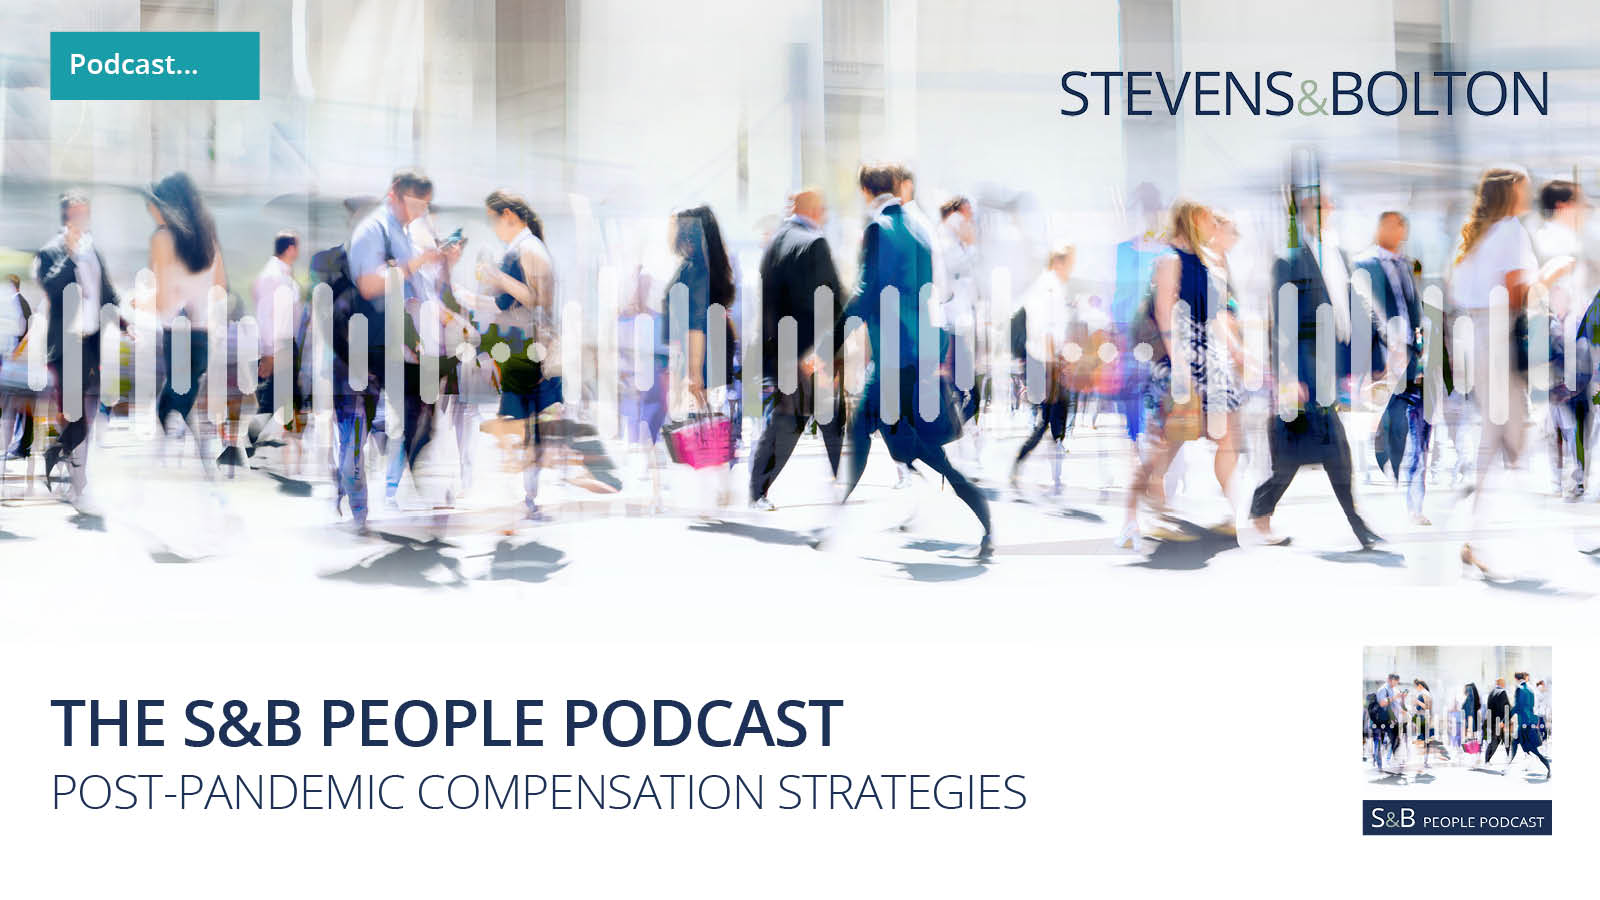 The S&B People Podcast - Post-pandemic compensation strategies